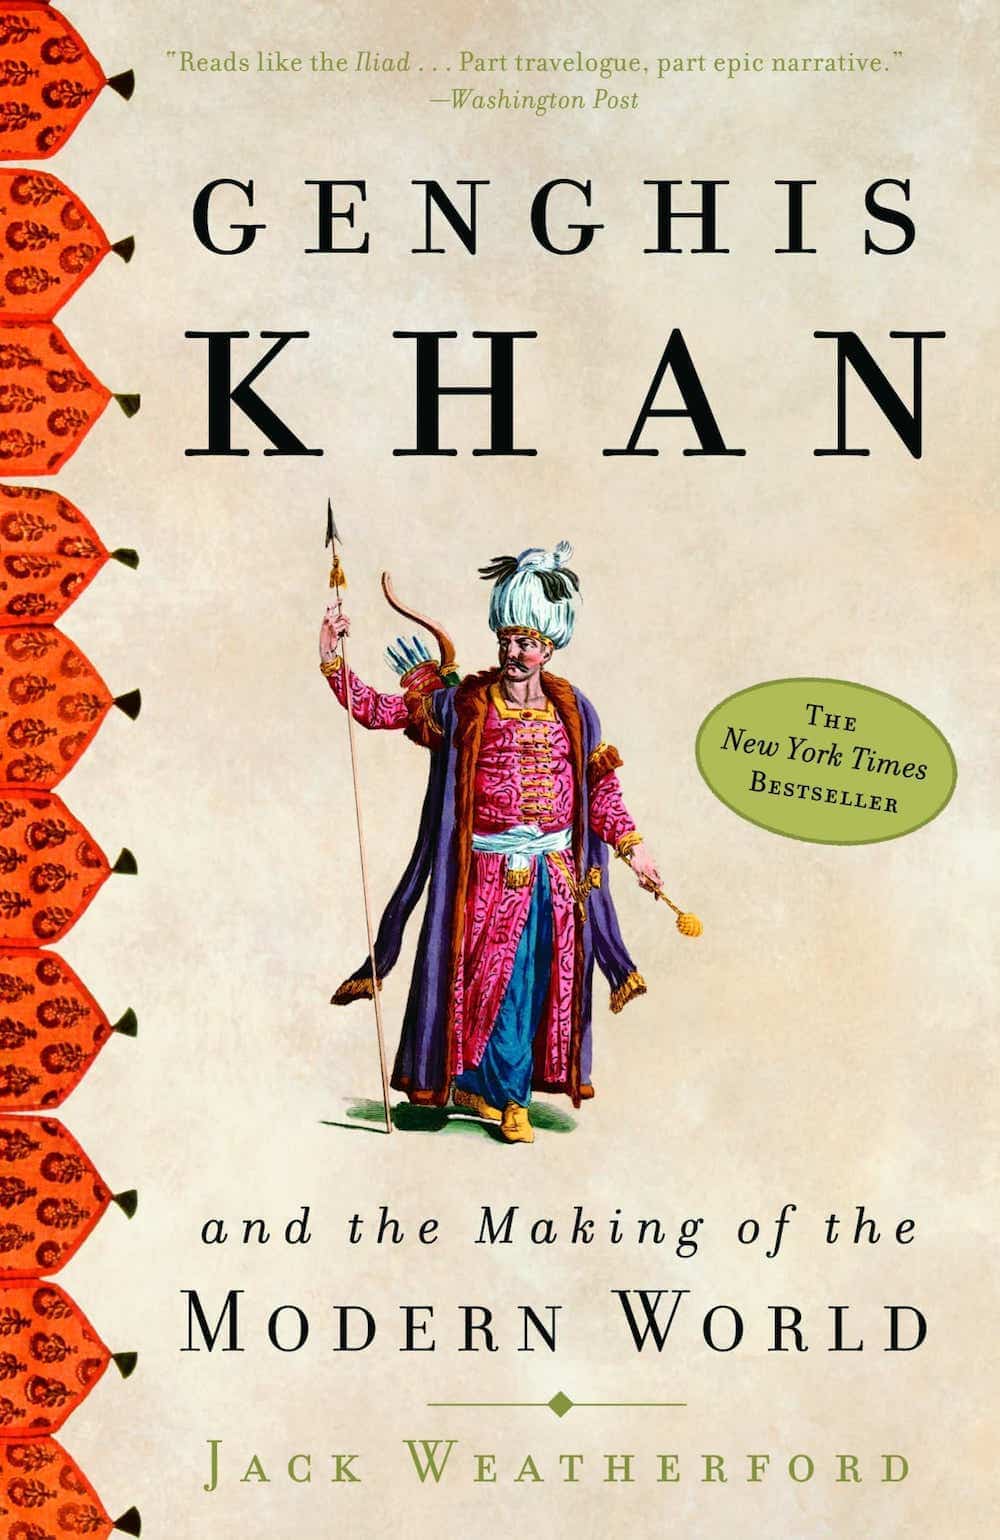 The cover of Genghis Khan and the Making of the Modern World